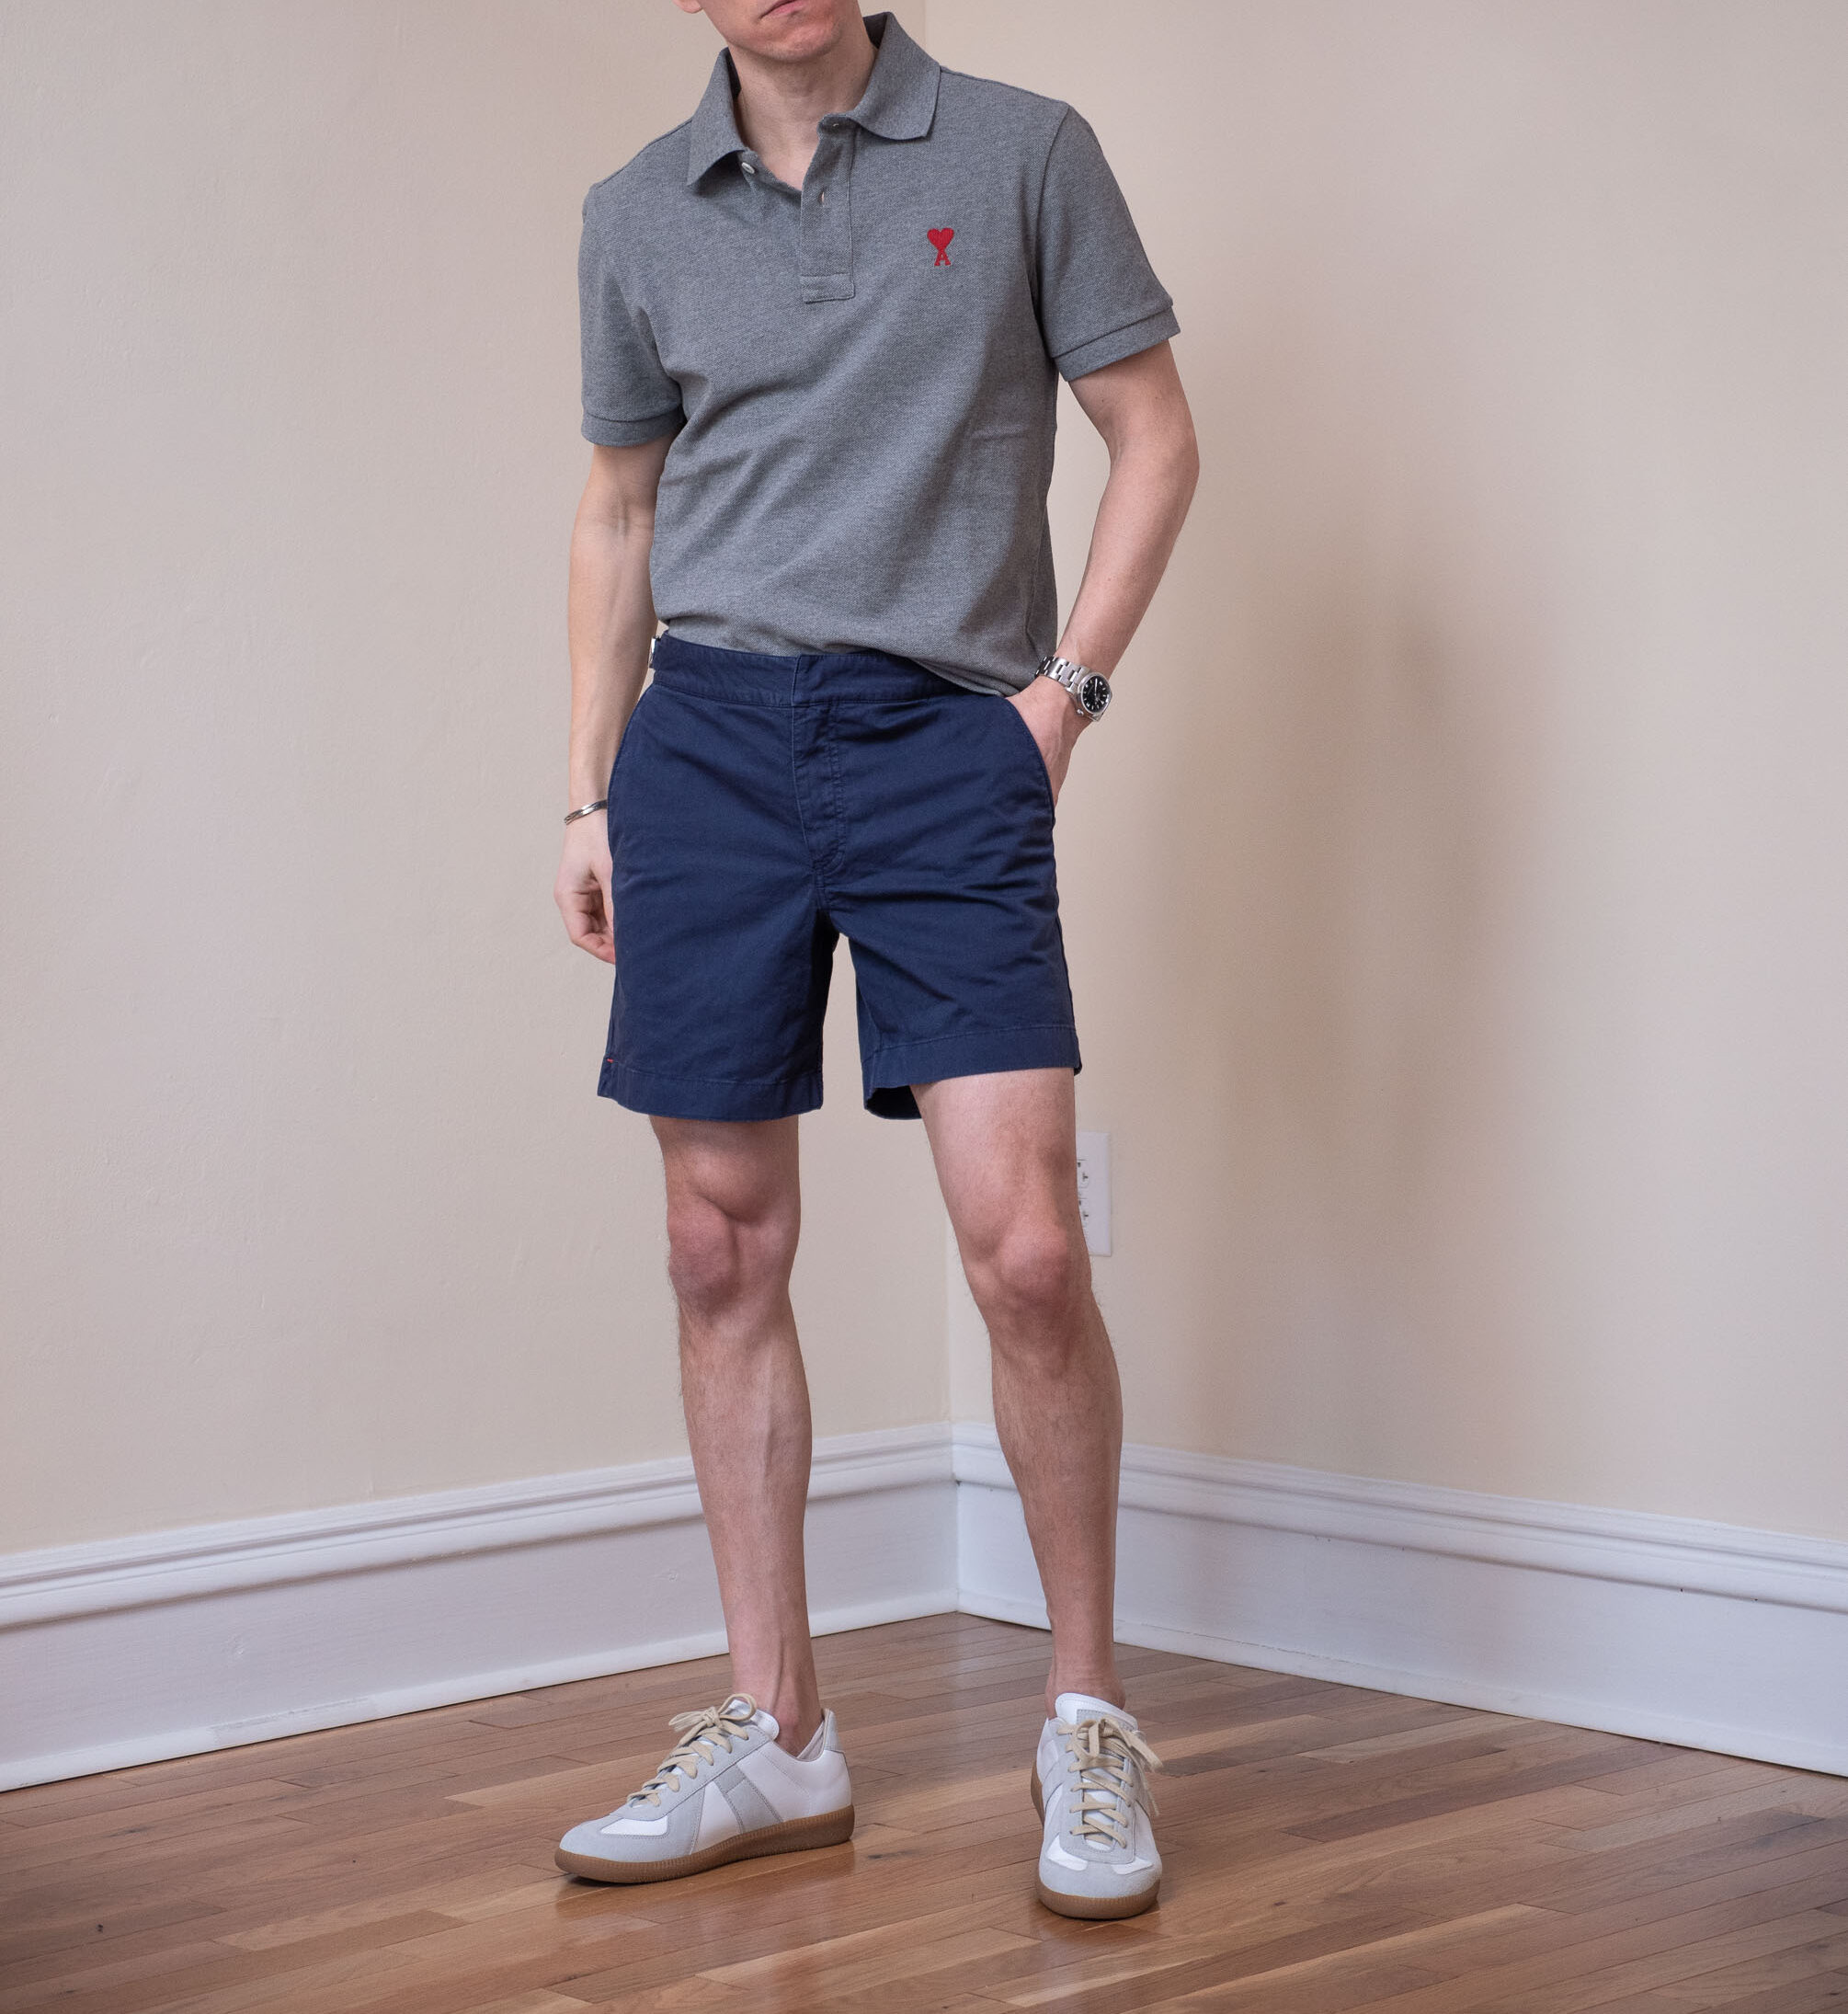 How To Tailor Men's Shorts (Get The Perfect Fit) 